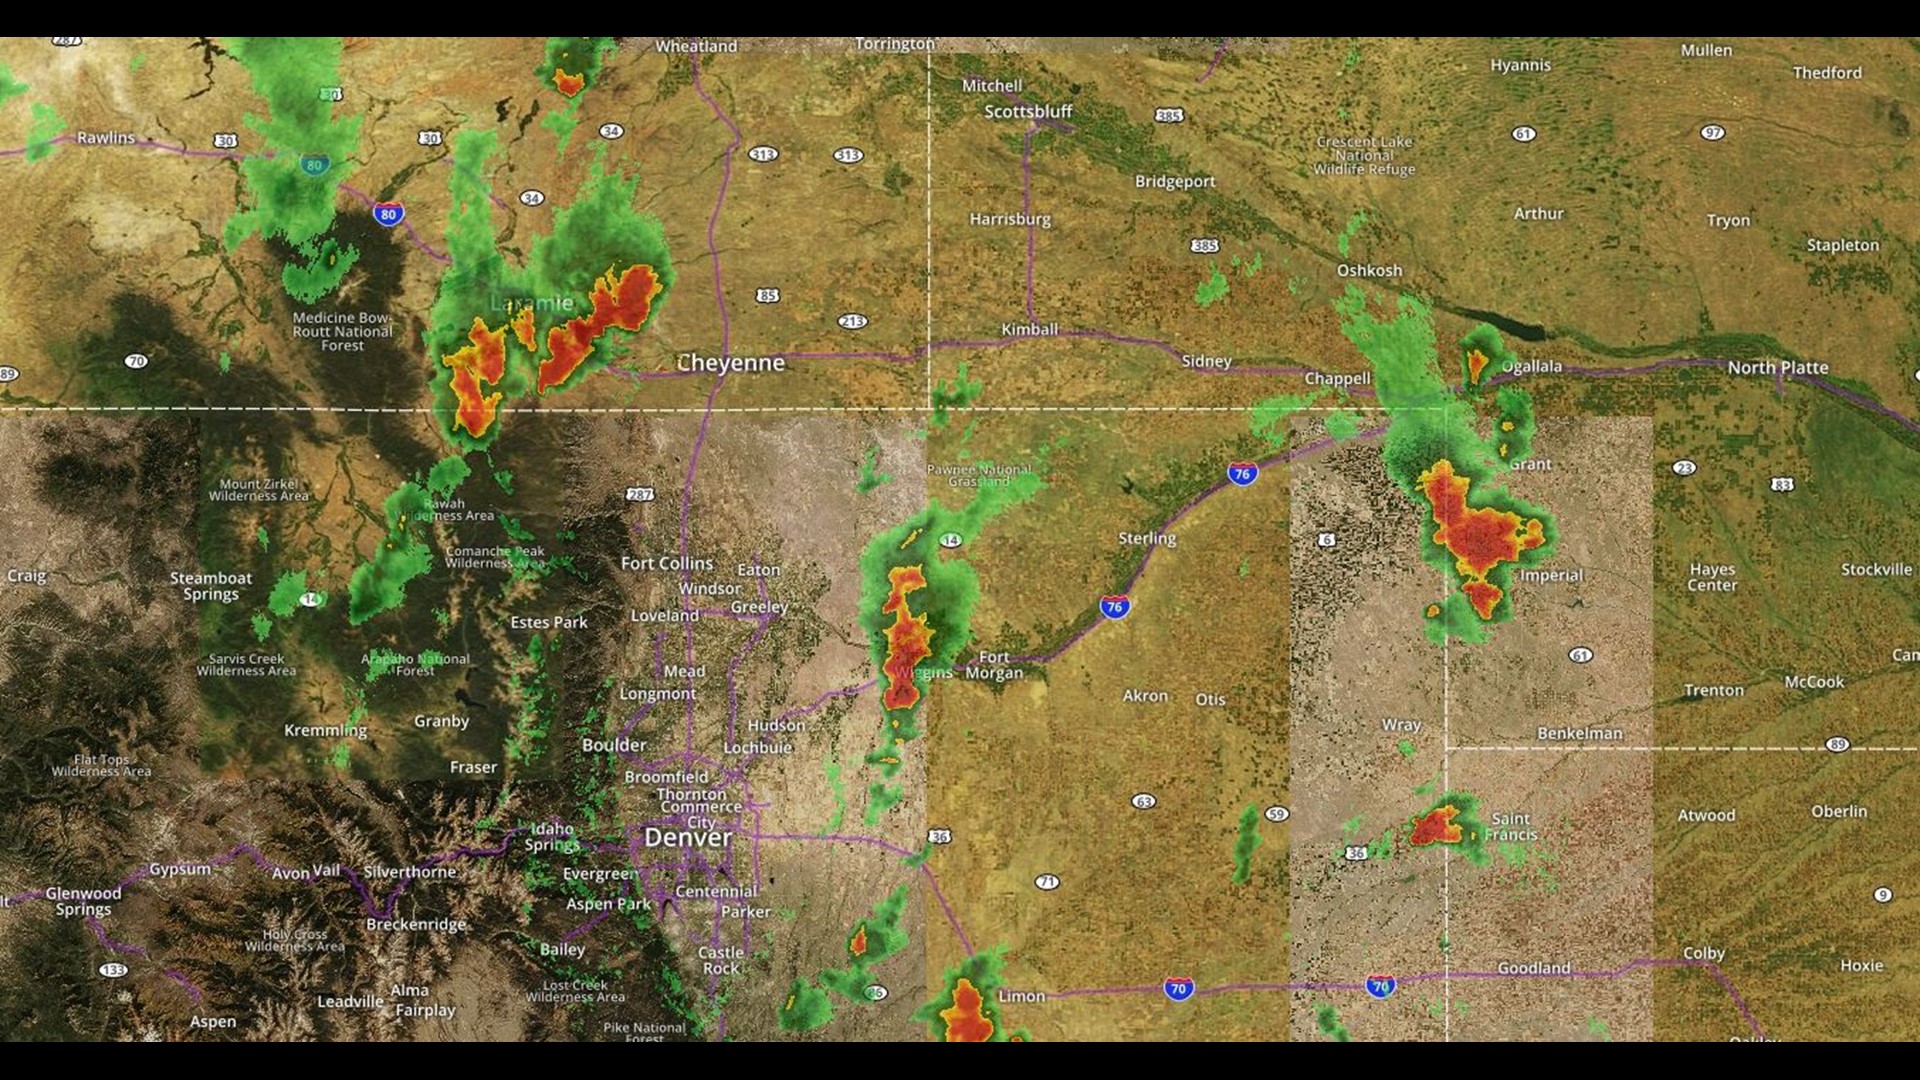 Severe weather forecasted for Colorado's eastern plains